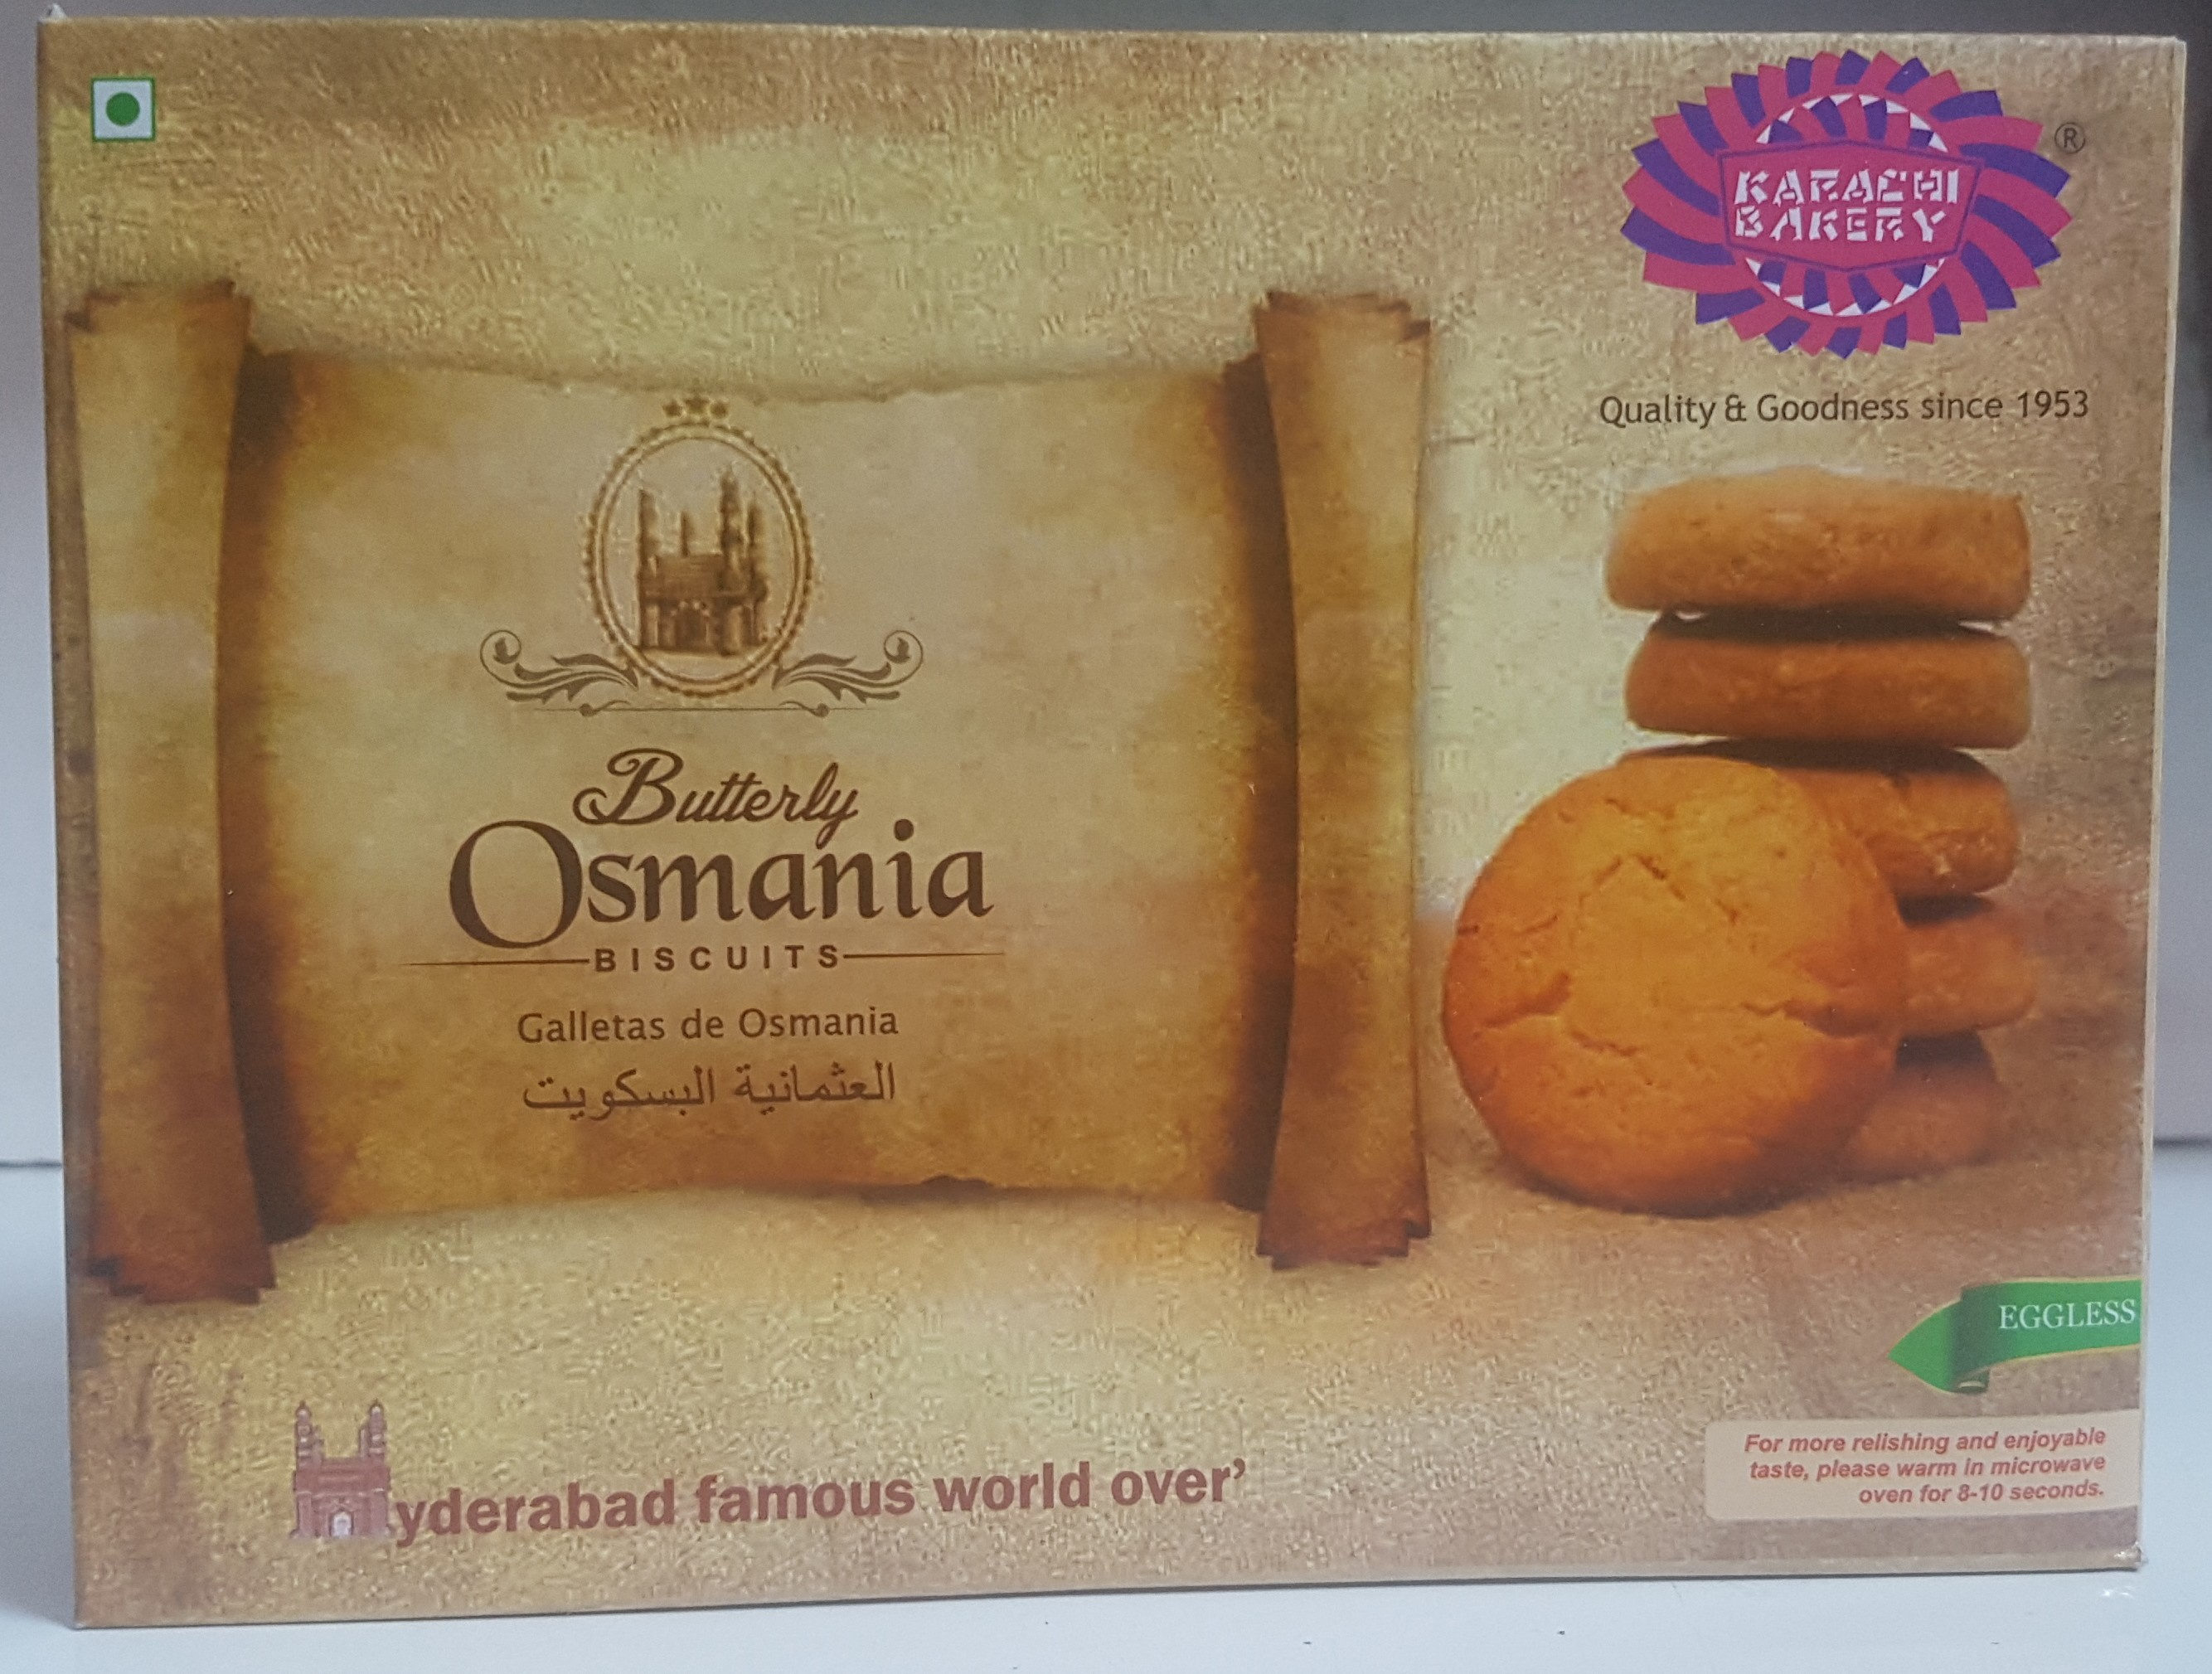 Bitterly Osmania Biscuits - Product